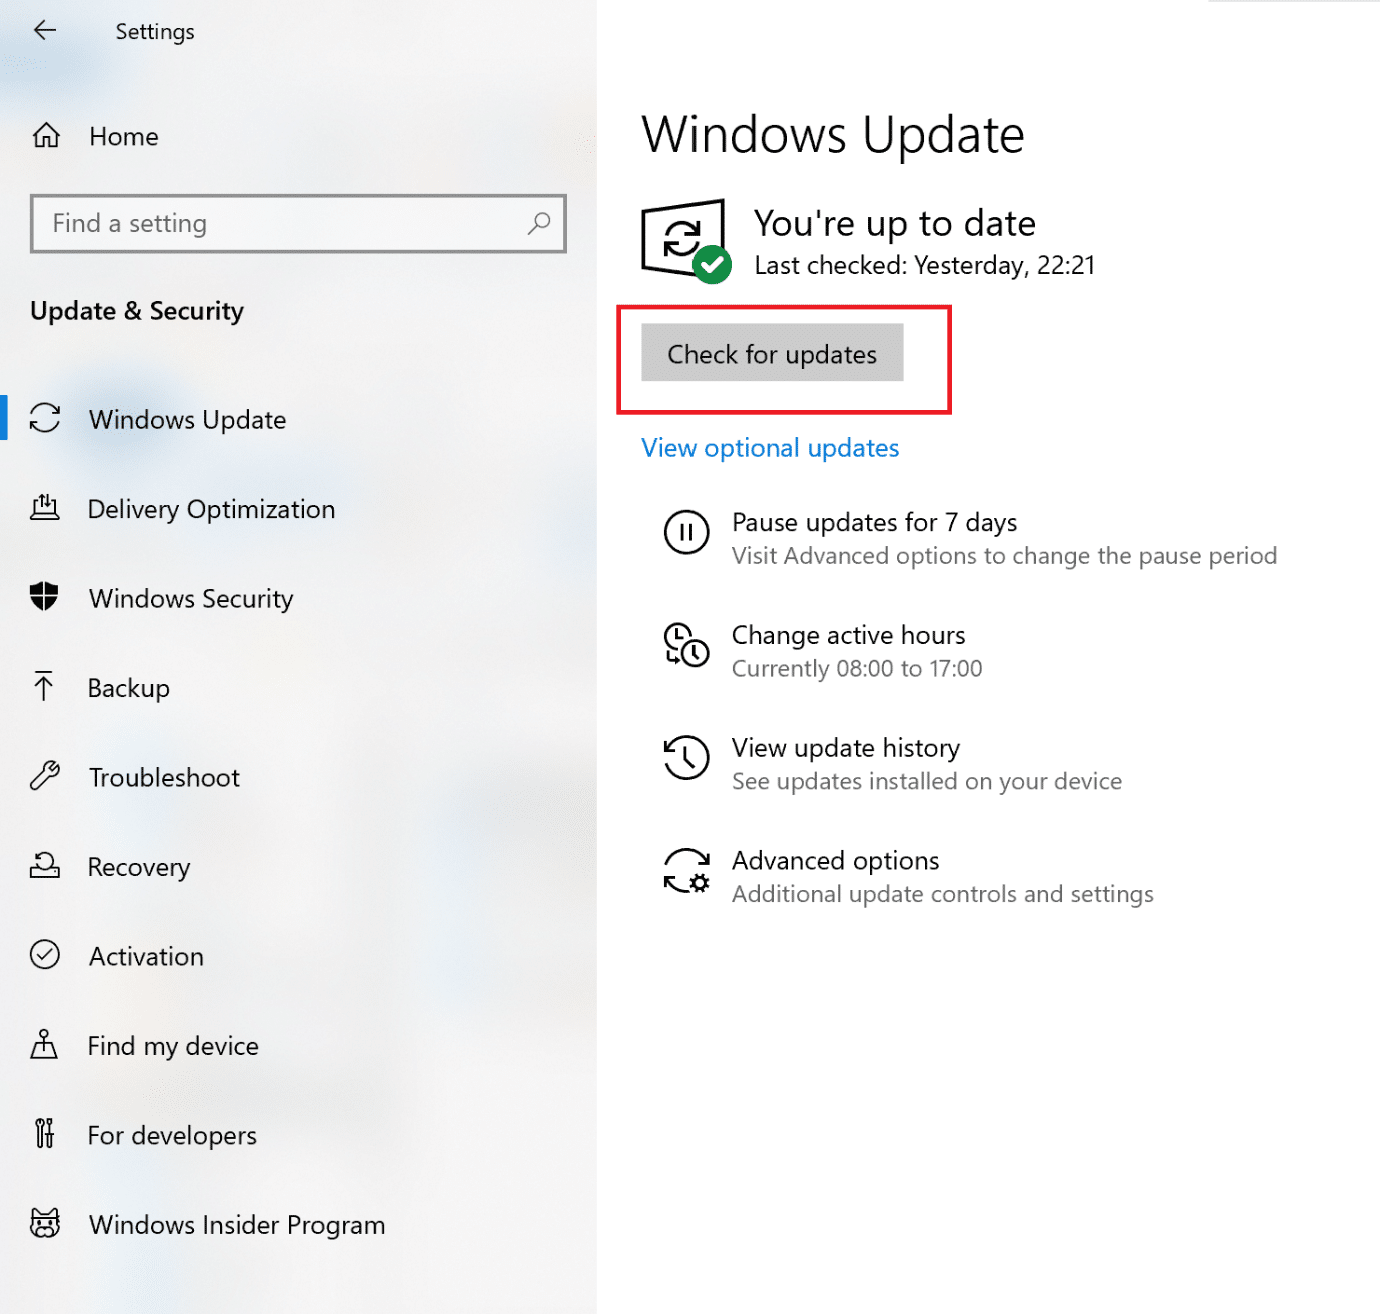 click on check for updates to install windows updates